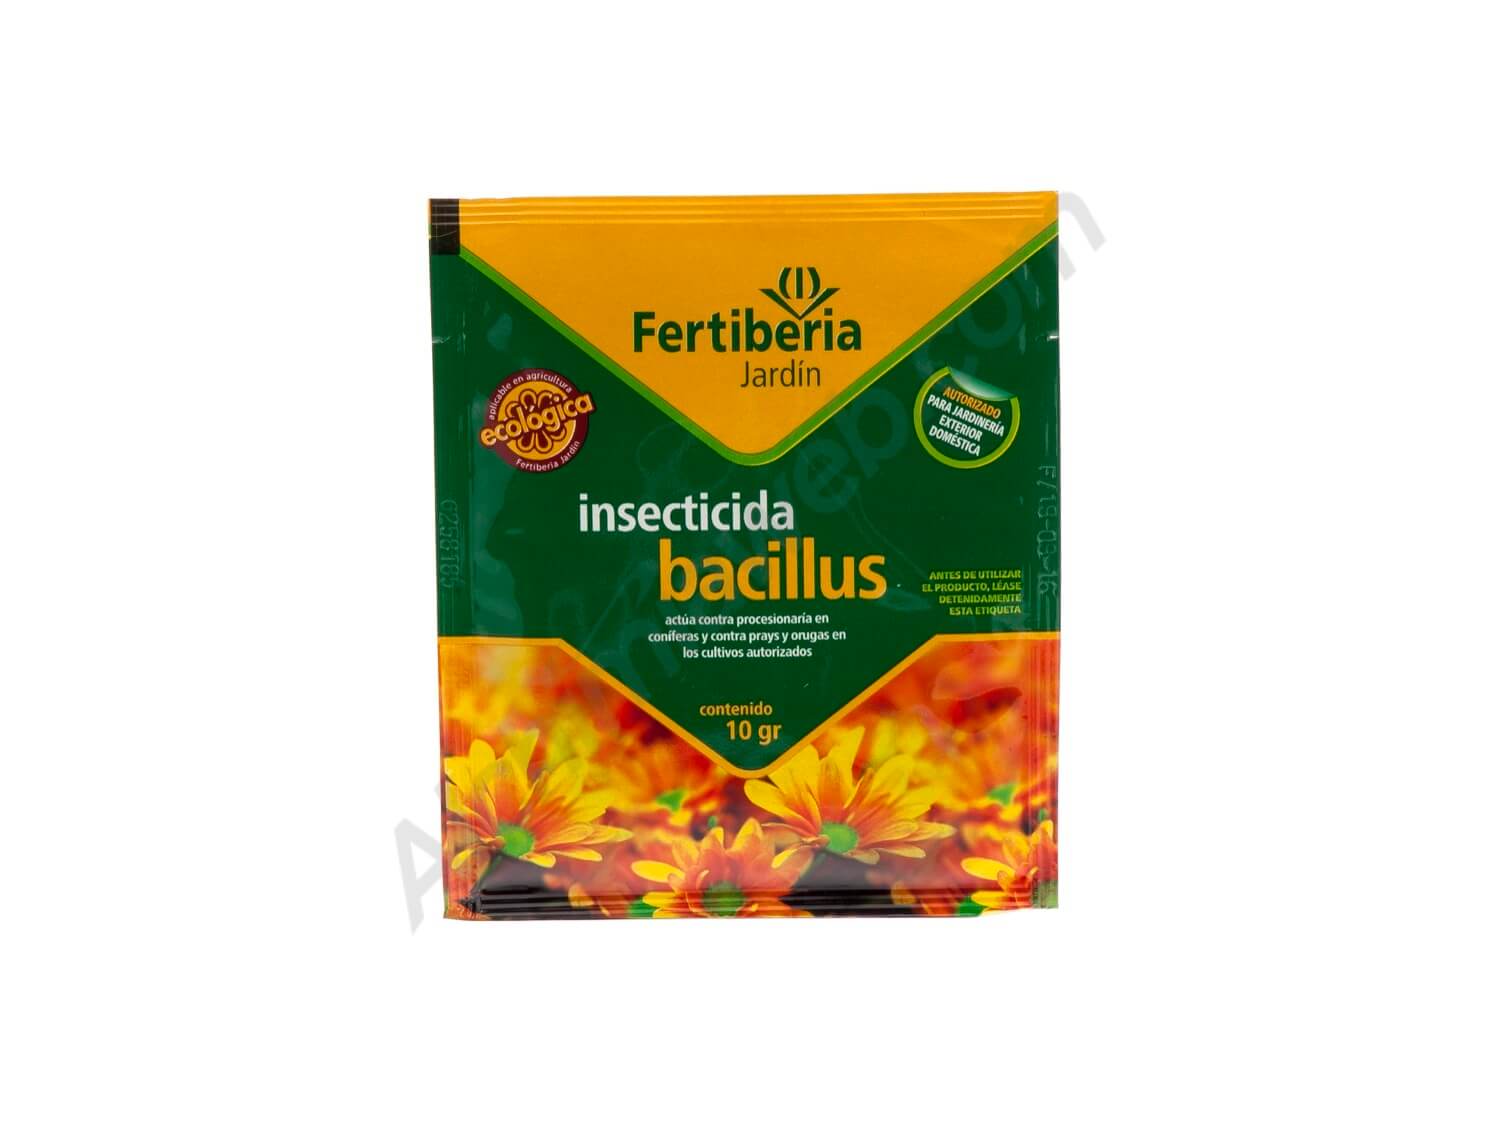 Sale of Bacillus Thuringens Insecticide